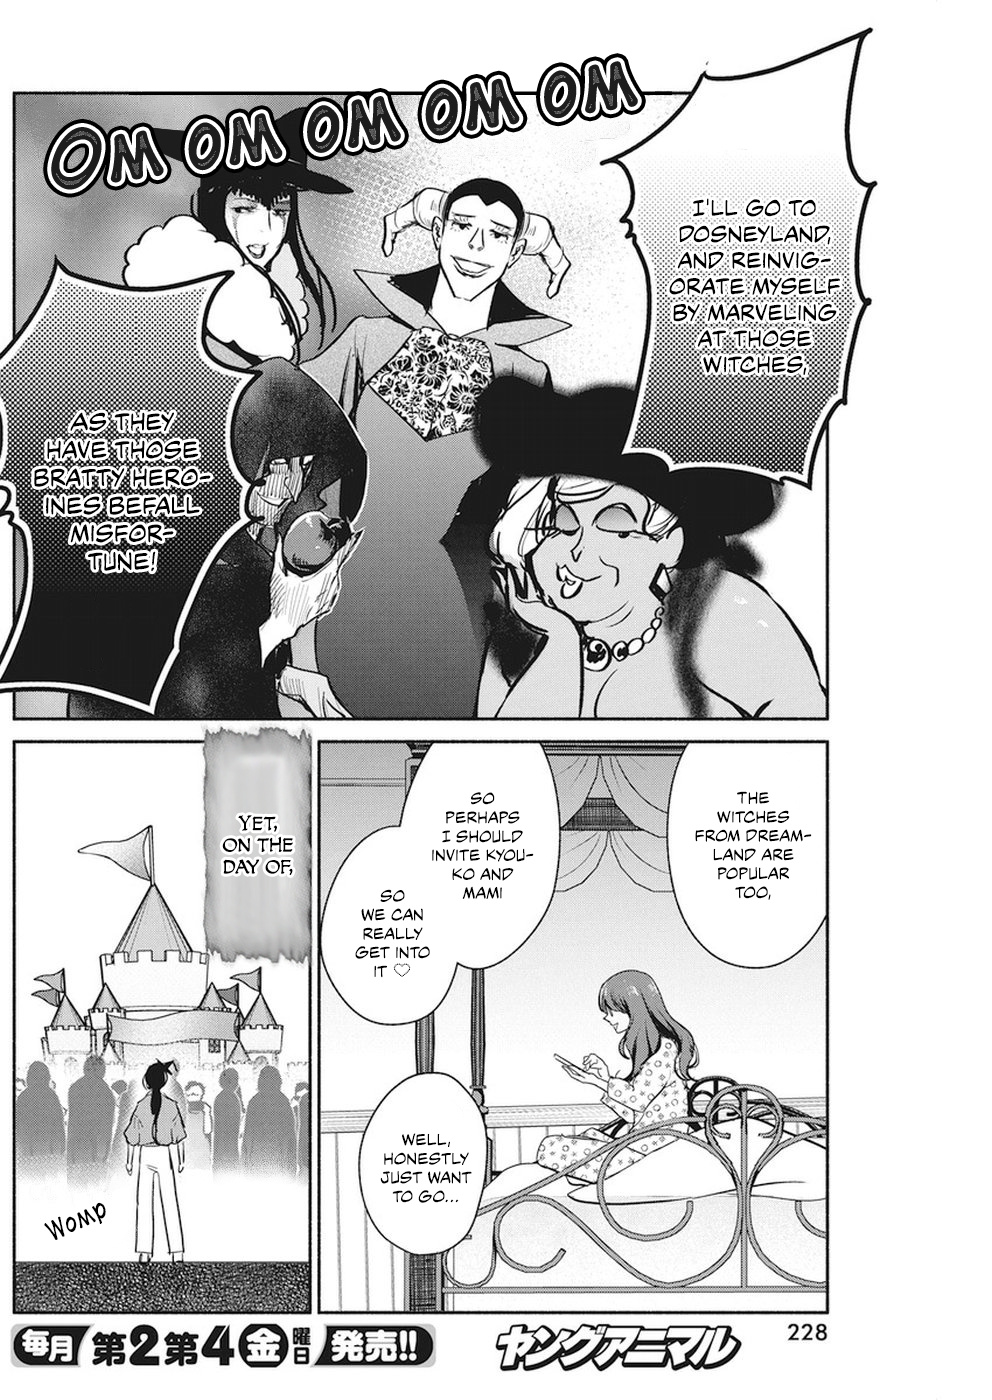 The Life Of The Witch Who Remains Single For About 300 Years! Chapter 12 #7